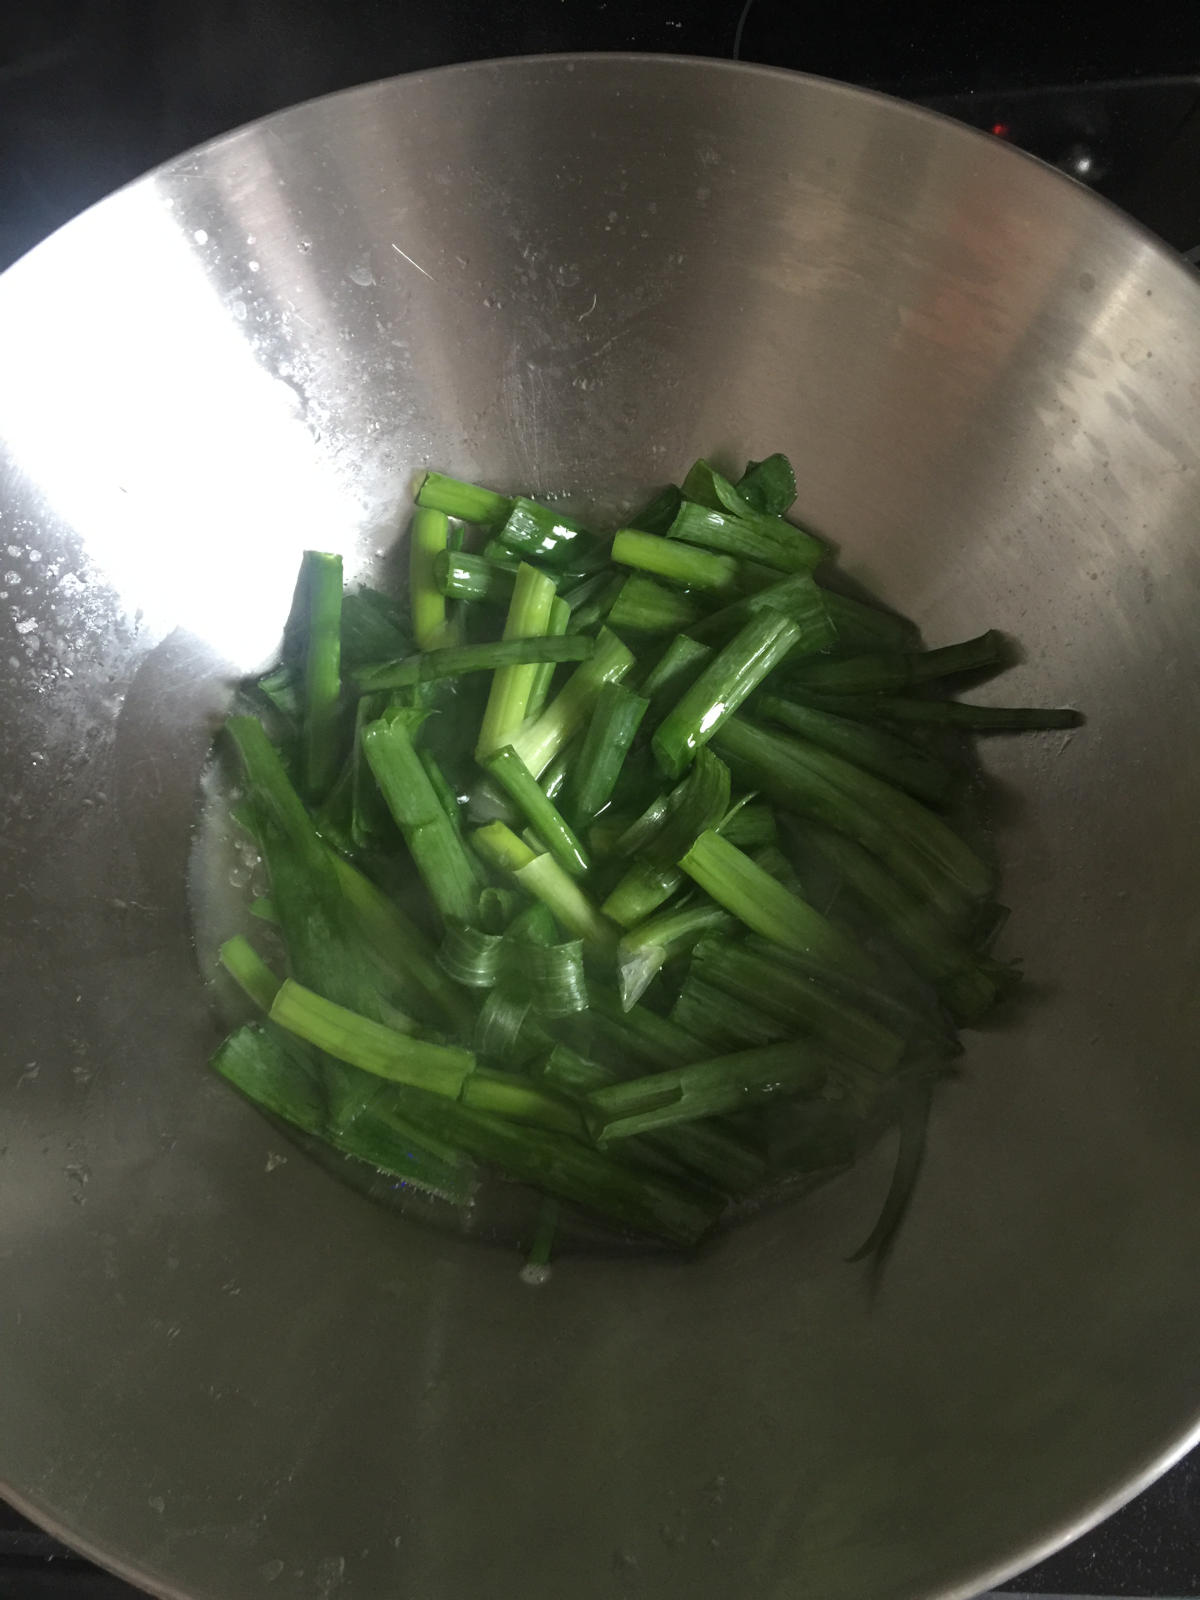 Scallion strips are cooking in wok.